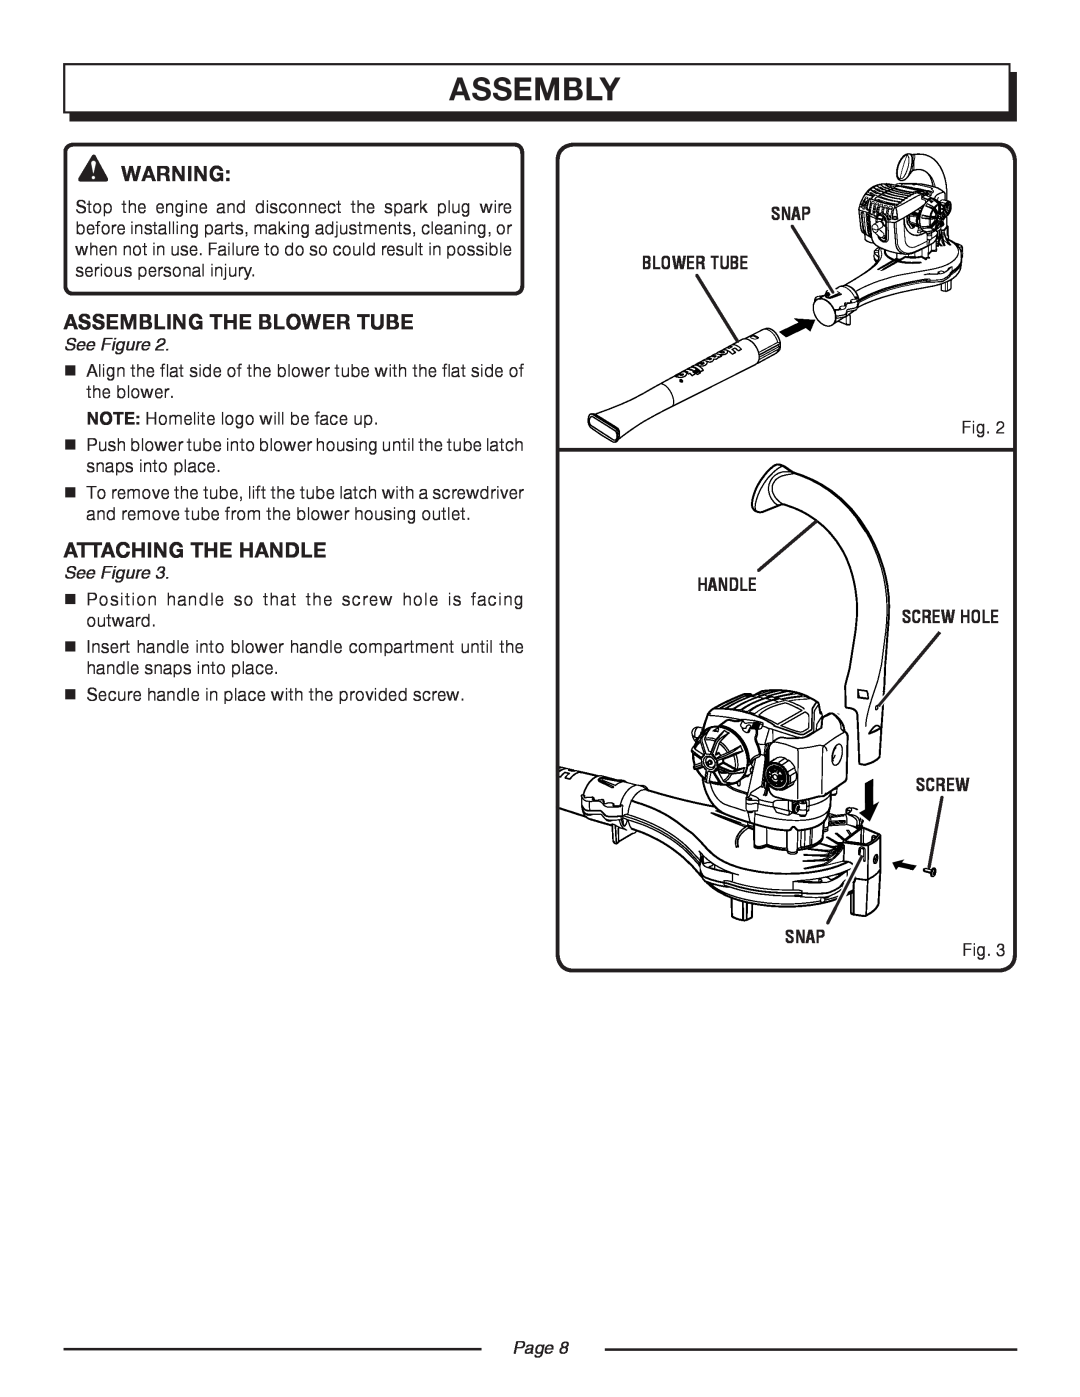 Homelite UT08520 manual Assembling The Blower Tube, Attaching the handle, assembly, See Figure, snap blower tube, Page  